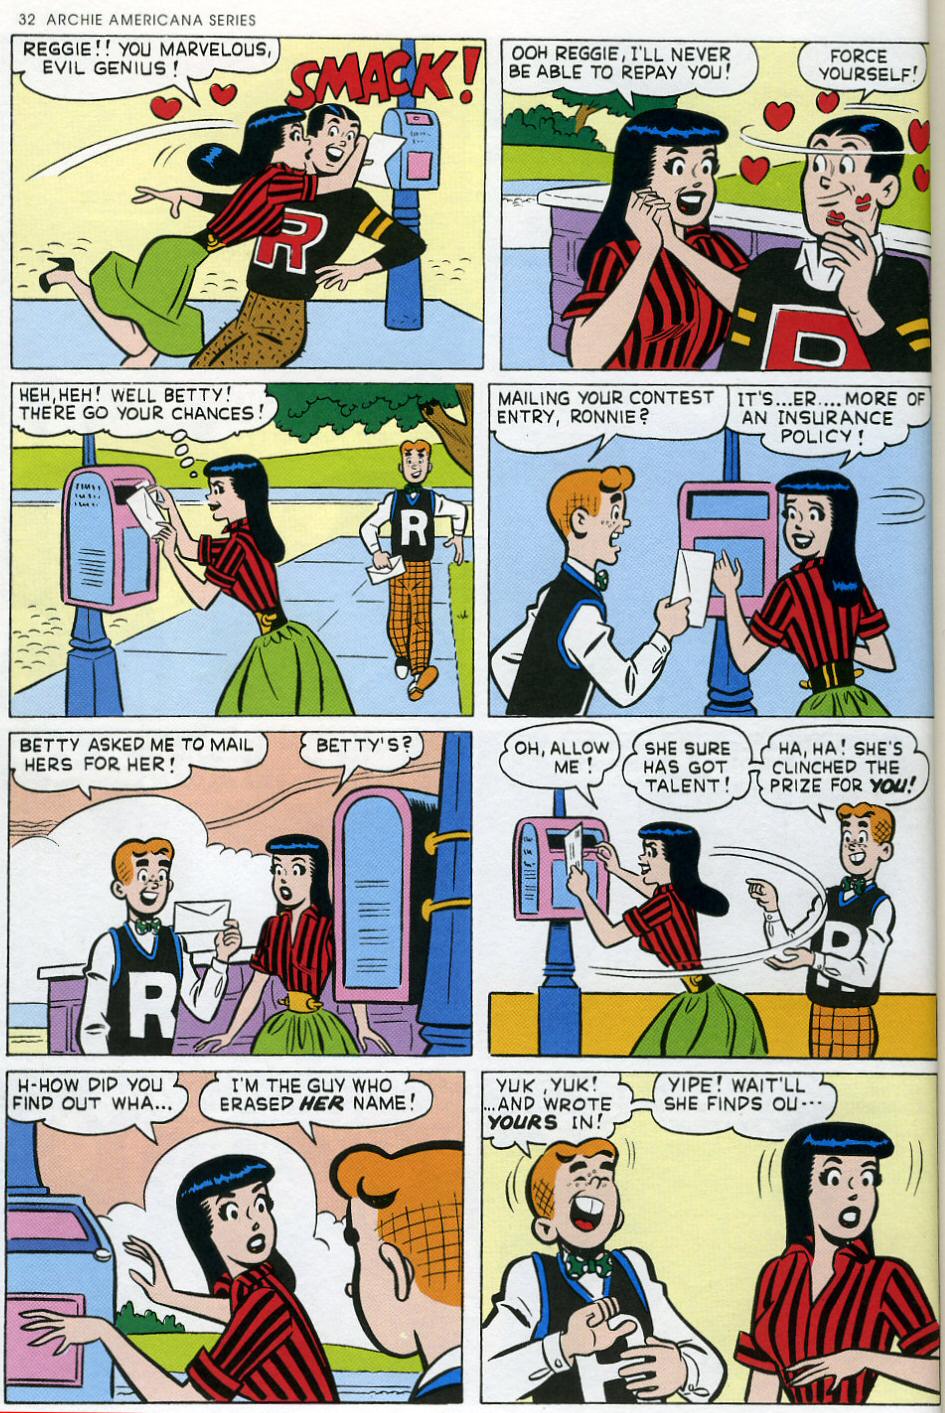 Read online Archie Americana Series comic -  Issue # TPB 2 - 34